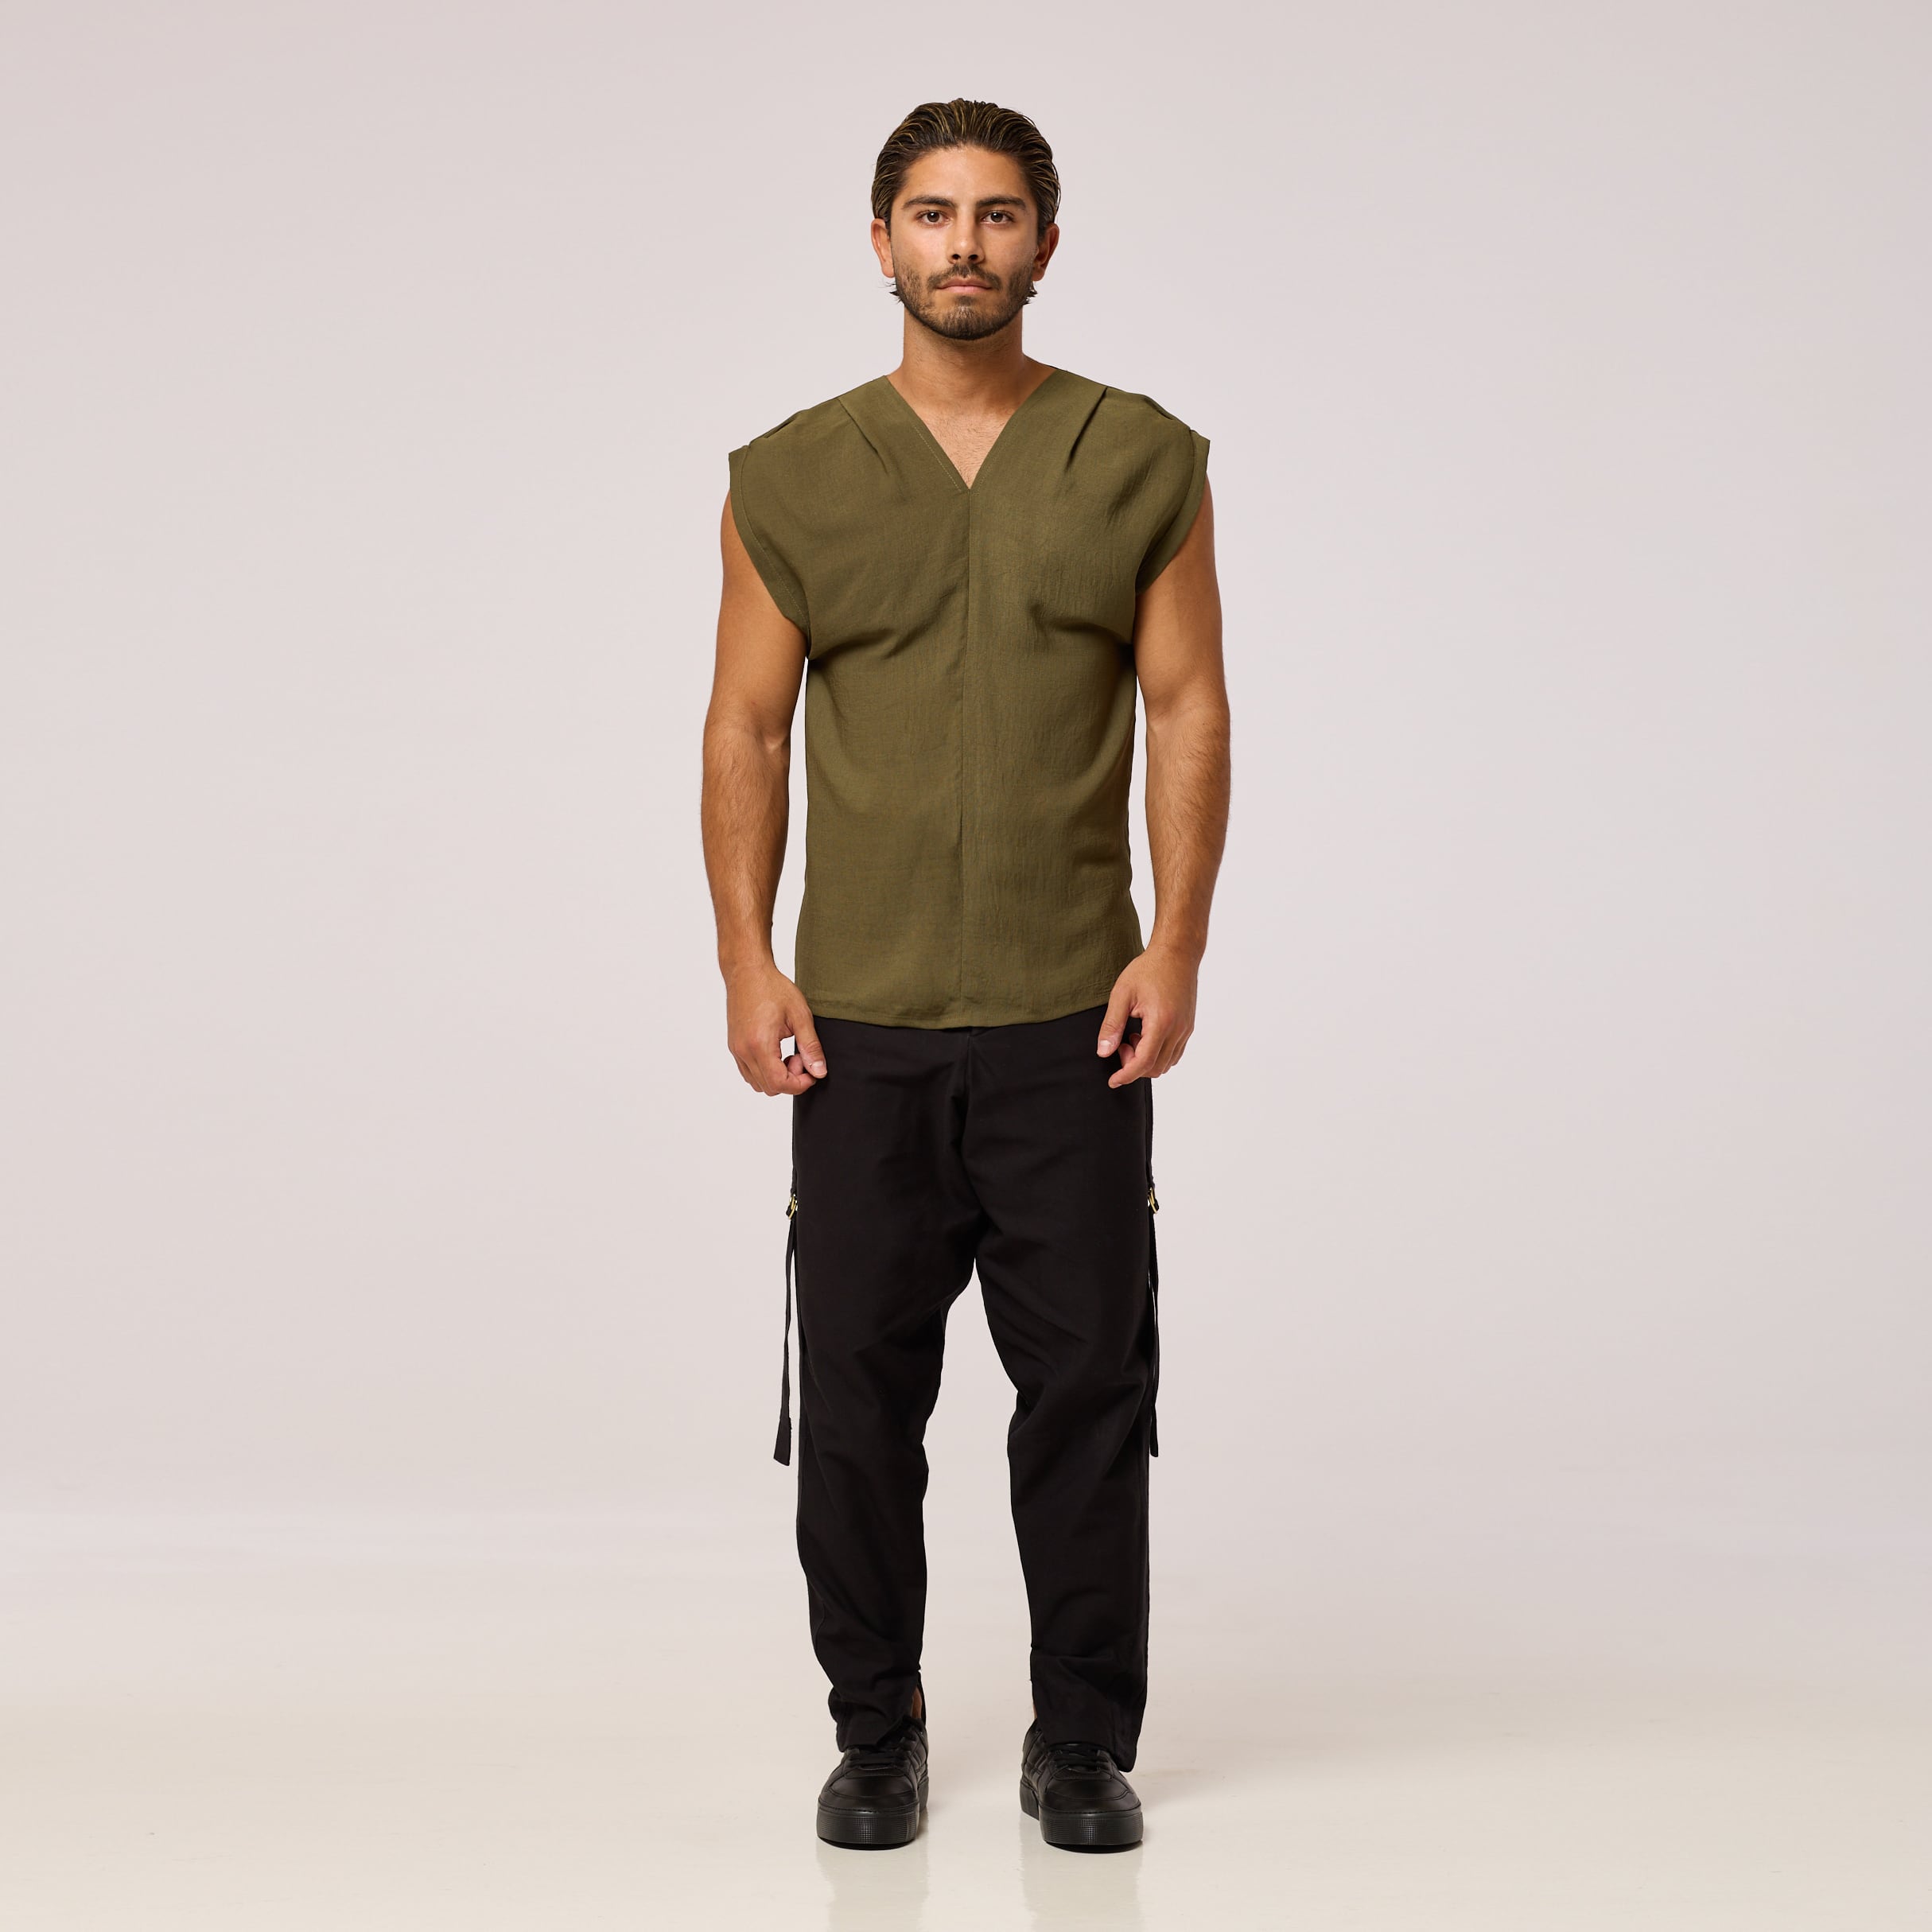   ZERØ London - Front Full View, olive green mens zero waste vest designed & made in London